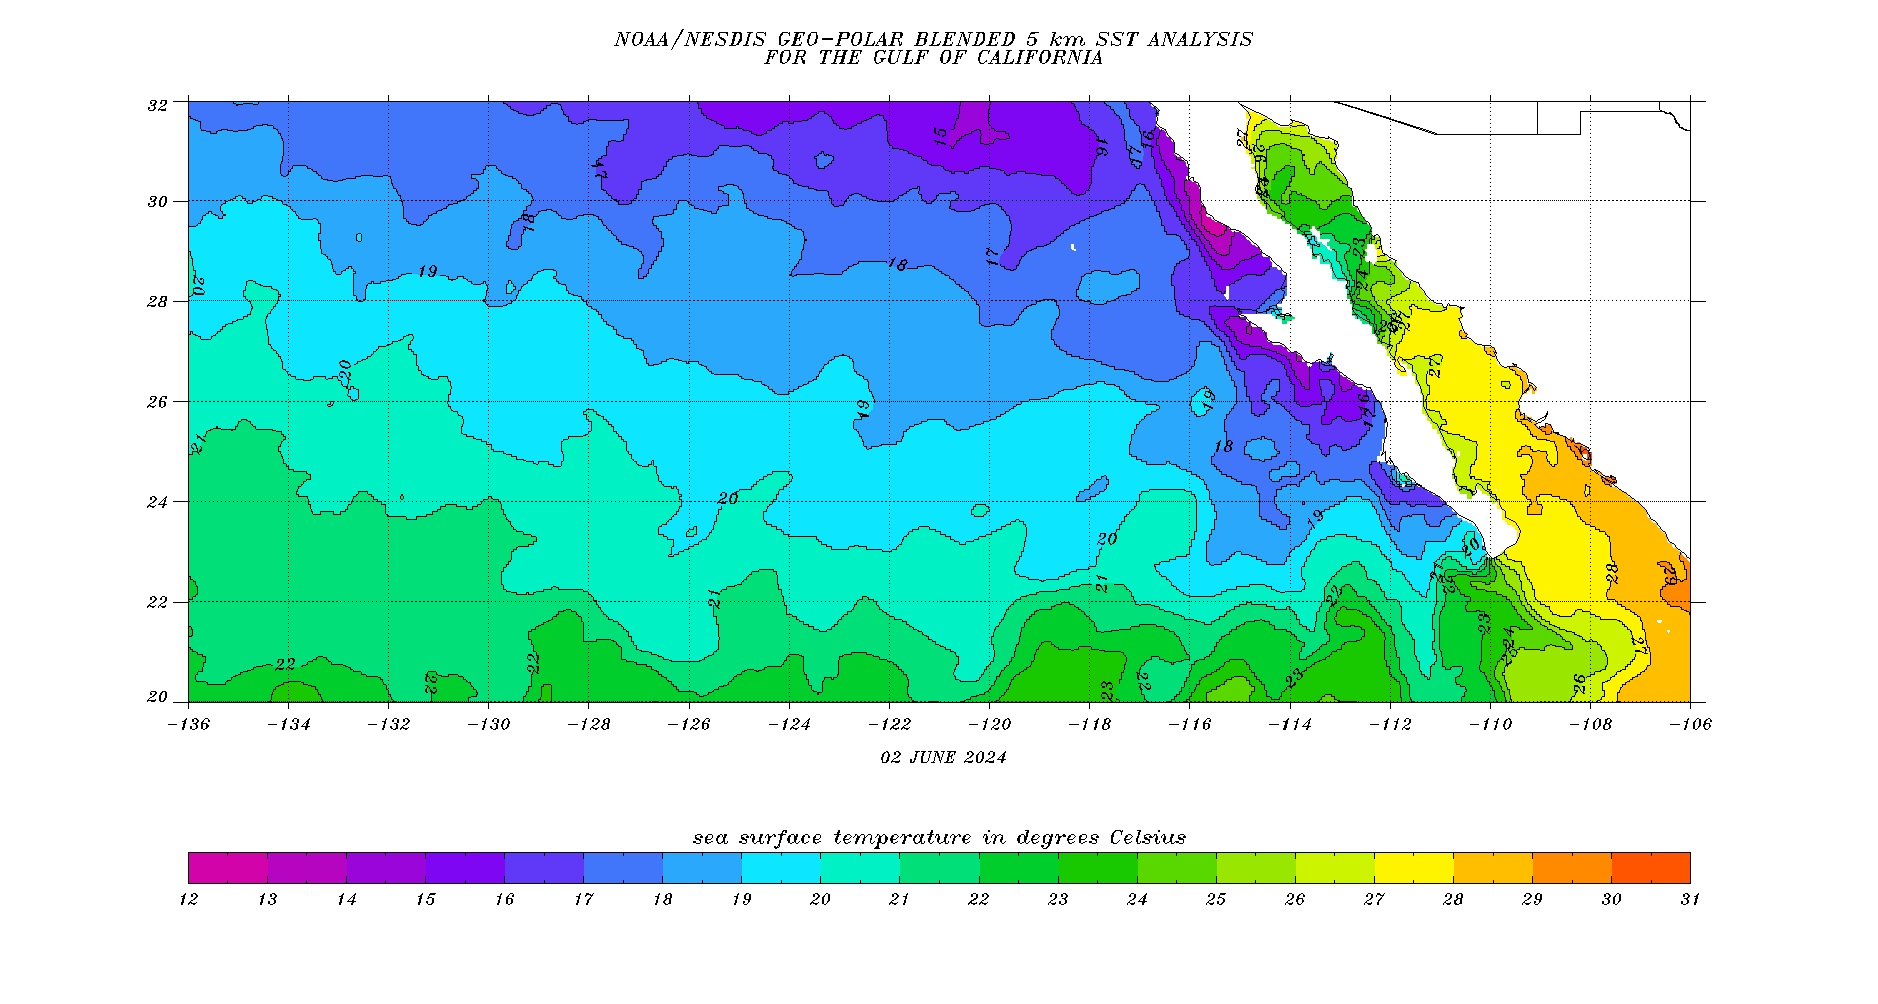 Water Temperature Chart